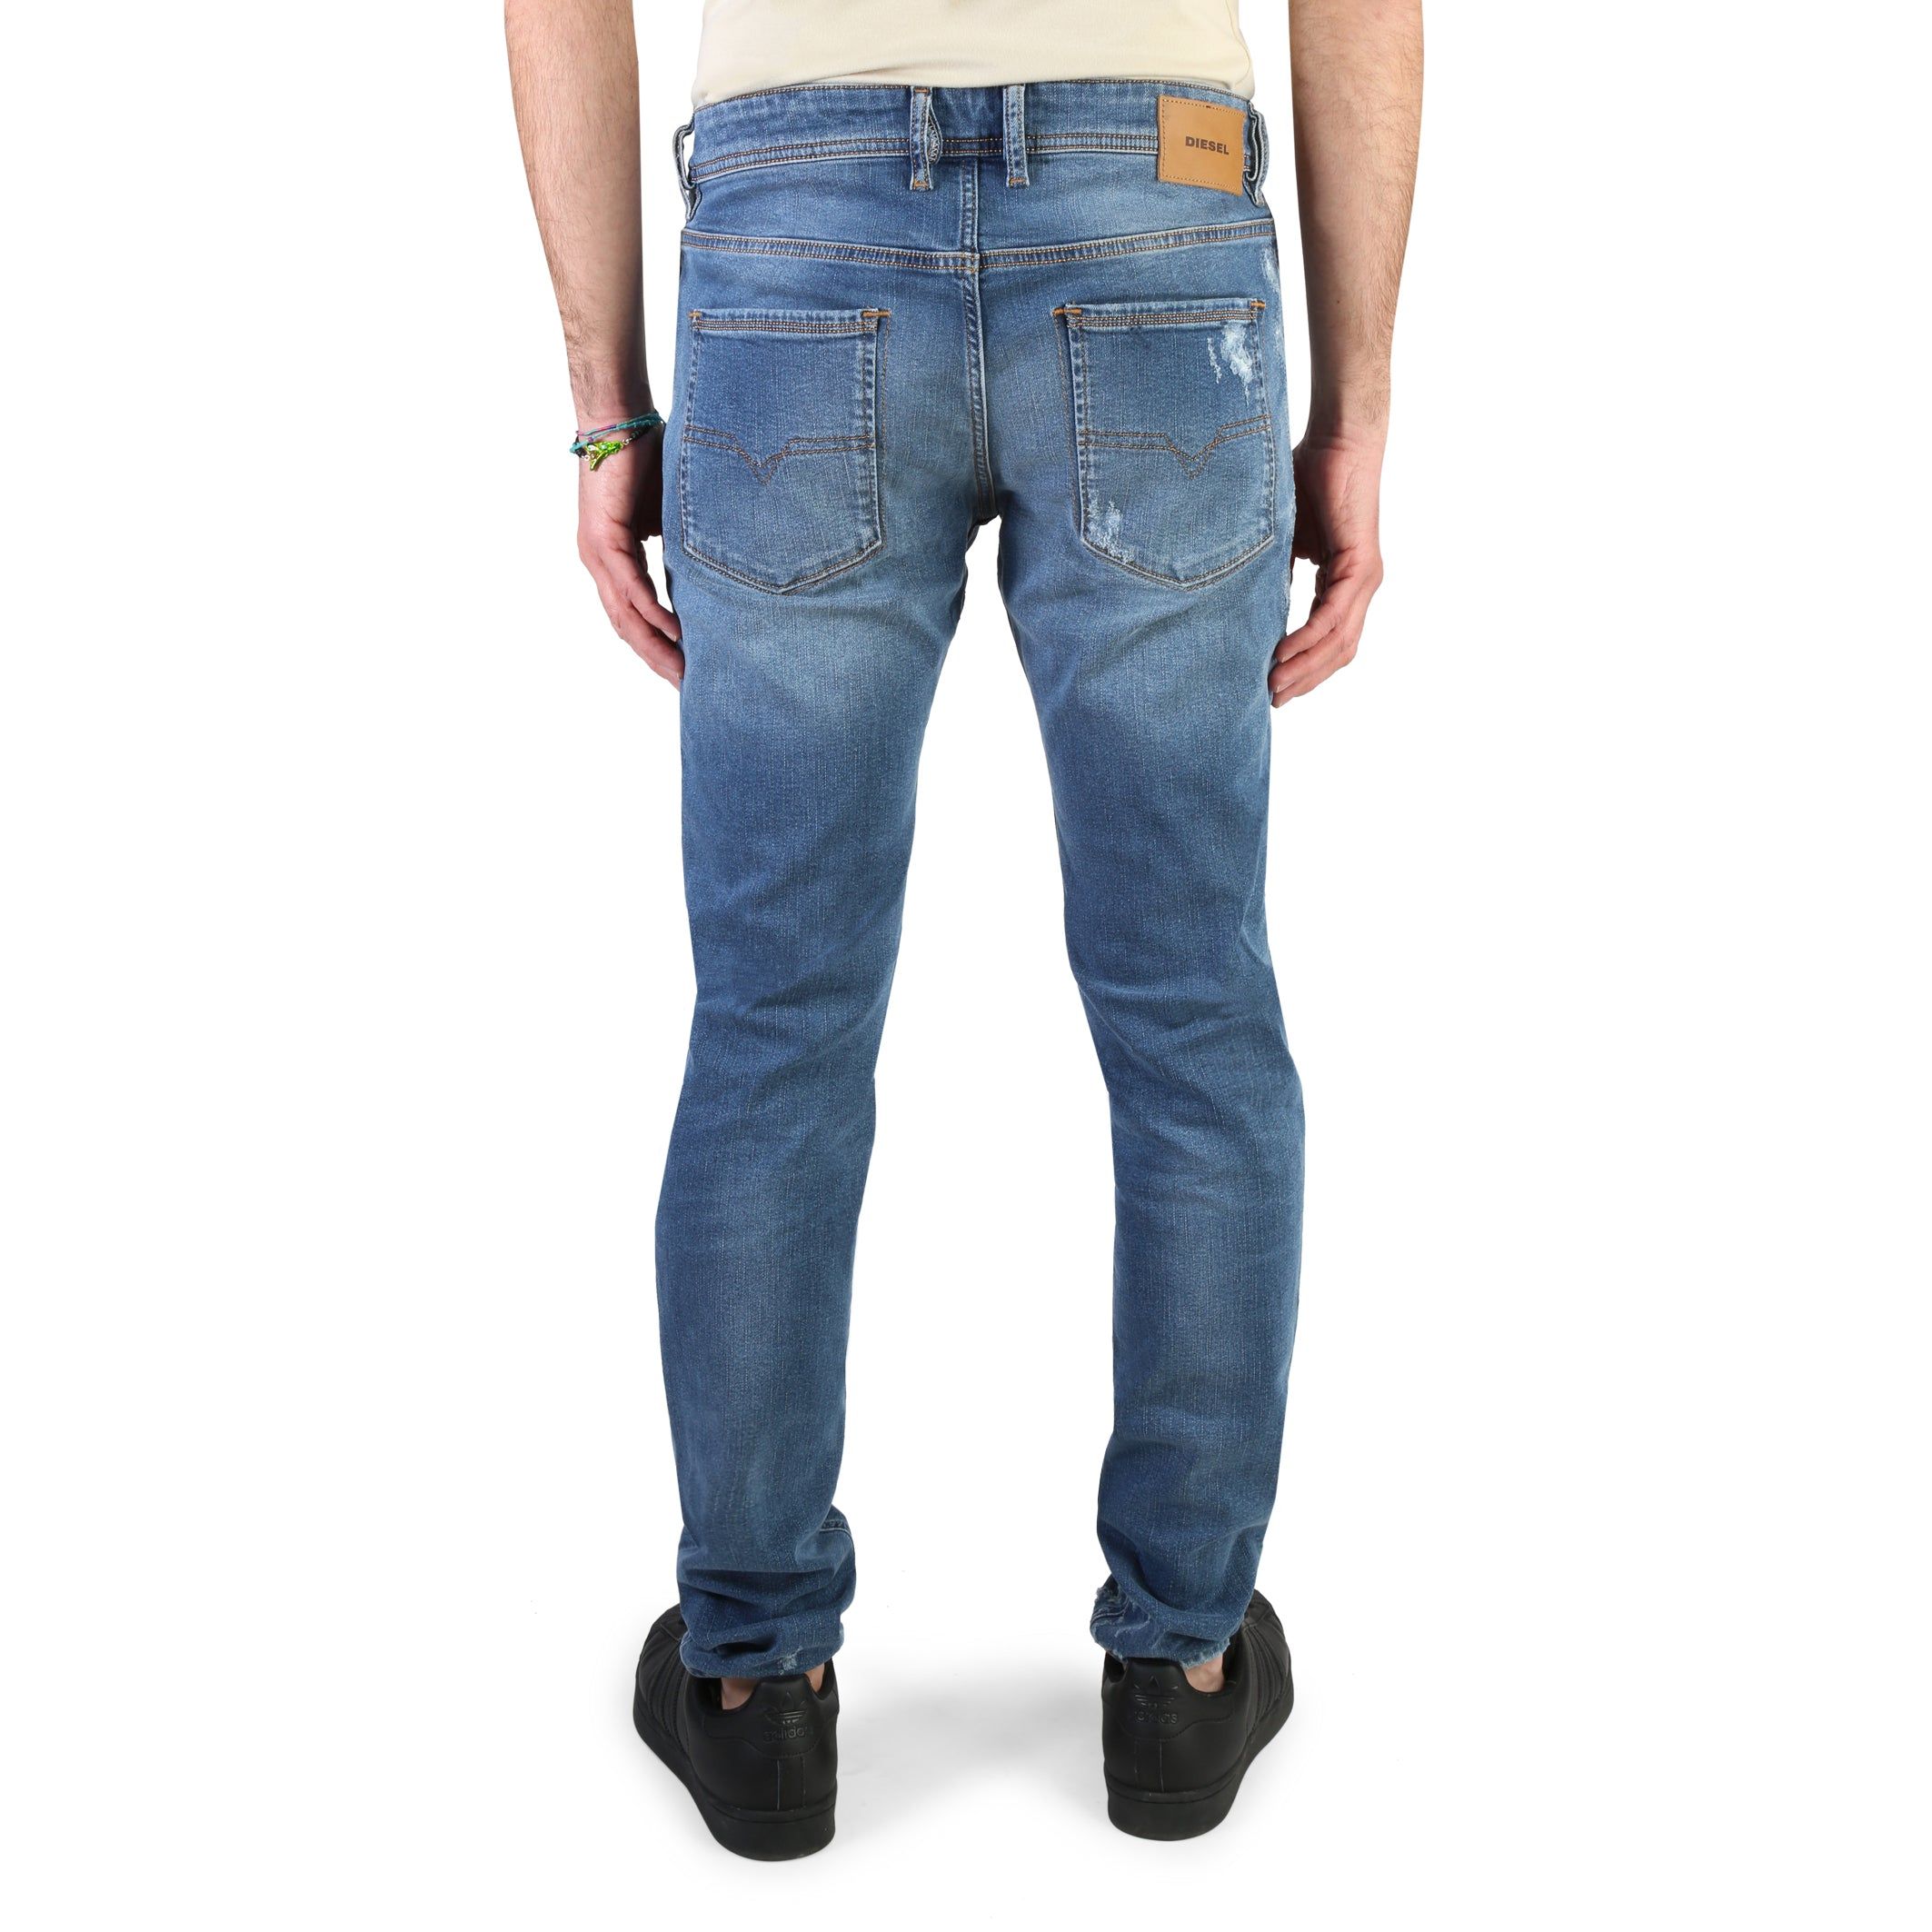 Gender: Man   Type: Jeans   Fastening: buttons, zip   External pockets: 5   Material: other fibres 59%, cotton 39%, elastane 2%   Washing: wash at 30° C   Model height, cm: 185   Model wears a size: 31   Fit: slim   Details: visible logo style:biker fit:slim Other Fibres 59%, Cotton 39%, Elastane 2% type:ripped-jeans occasion:street wash:light-wash